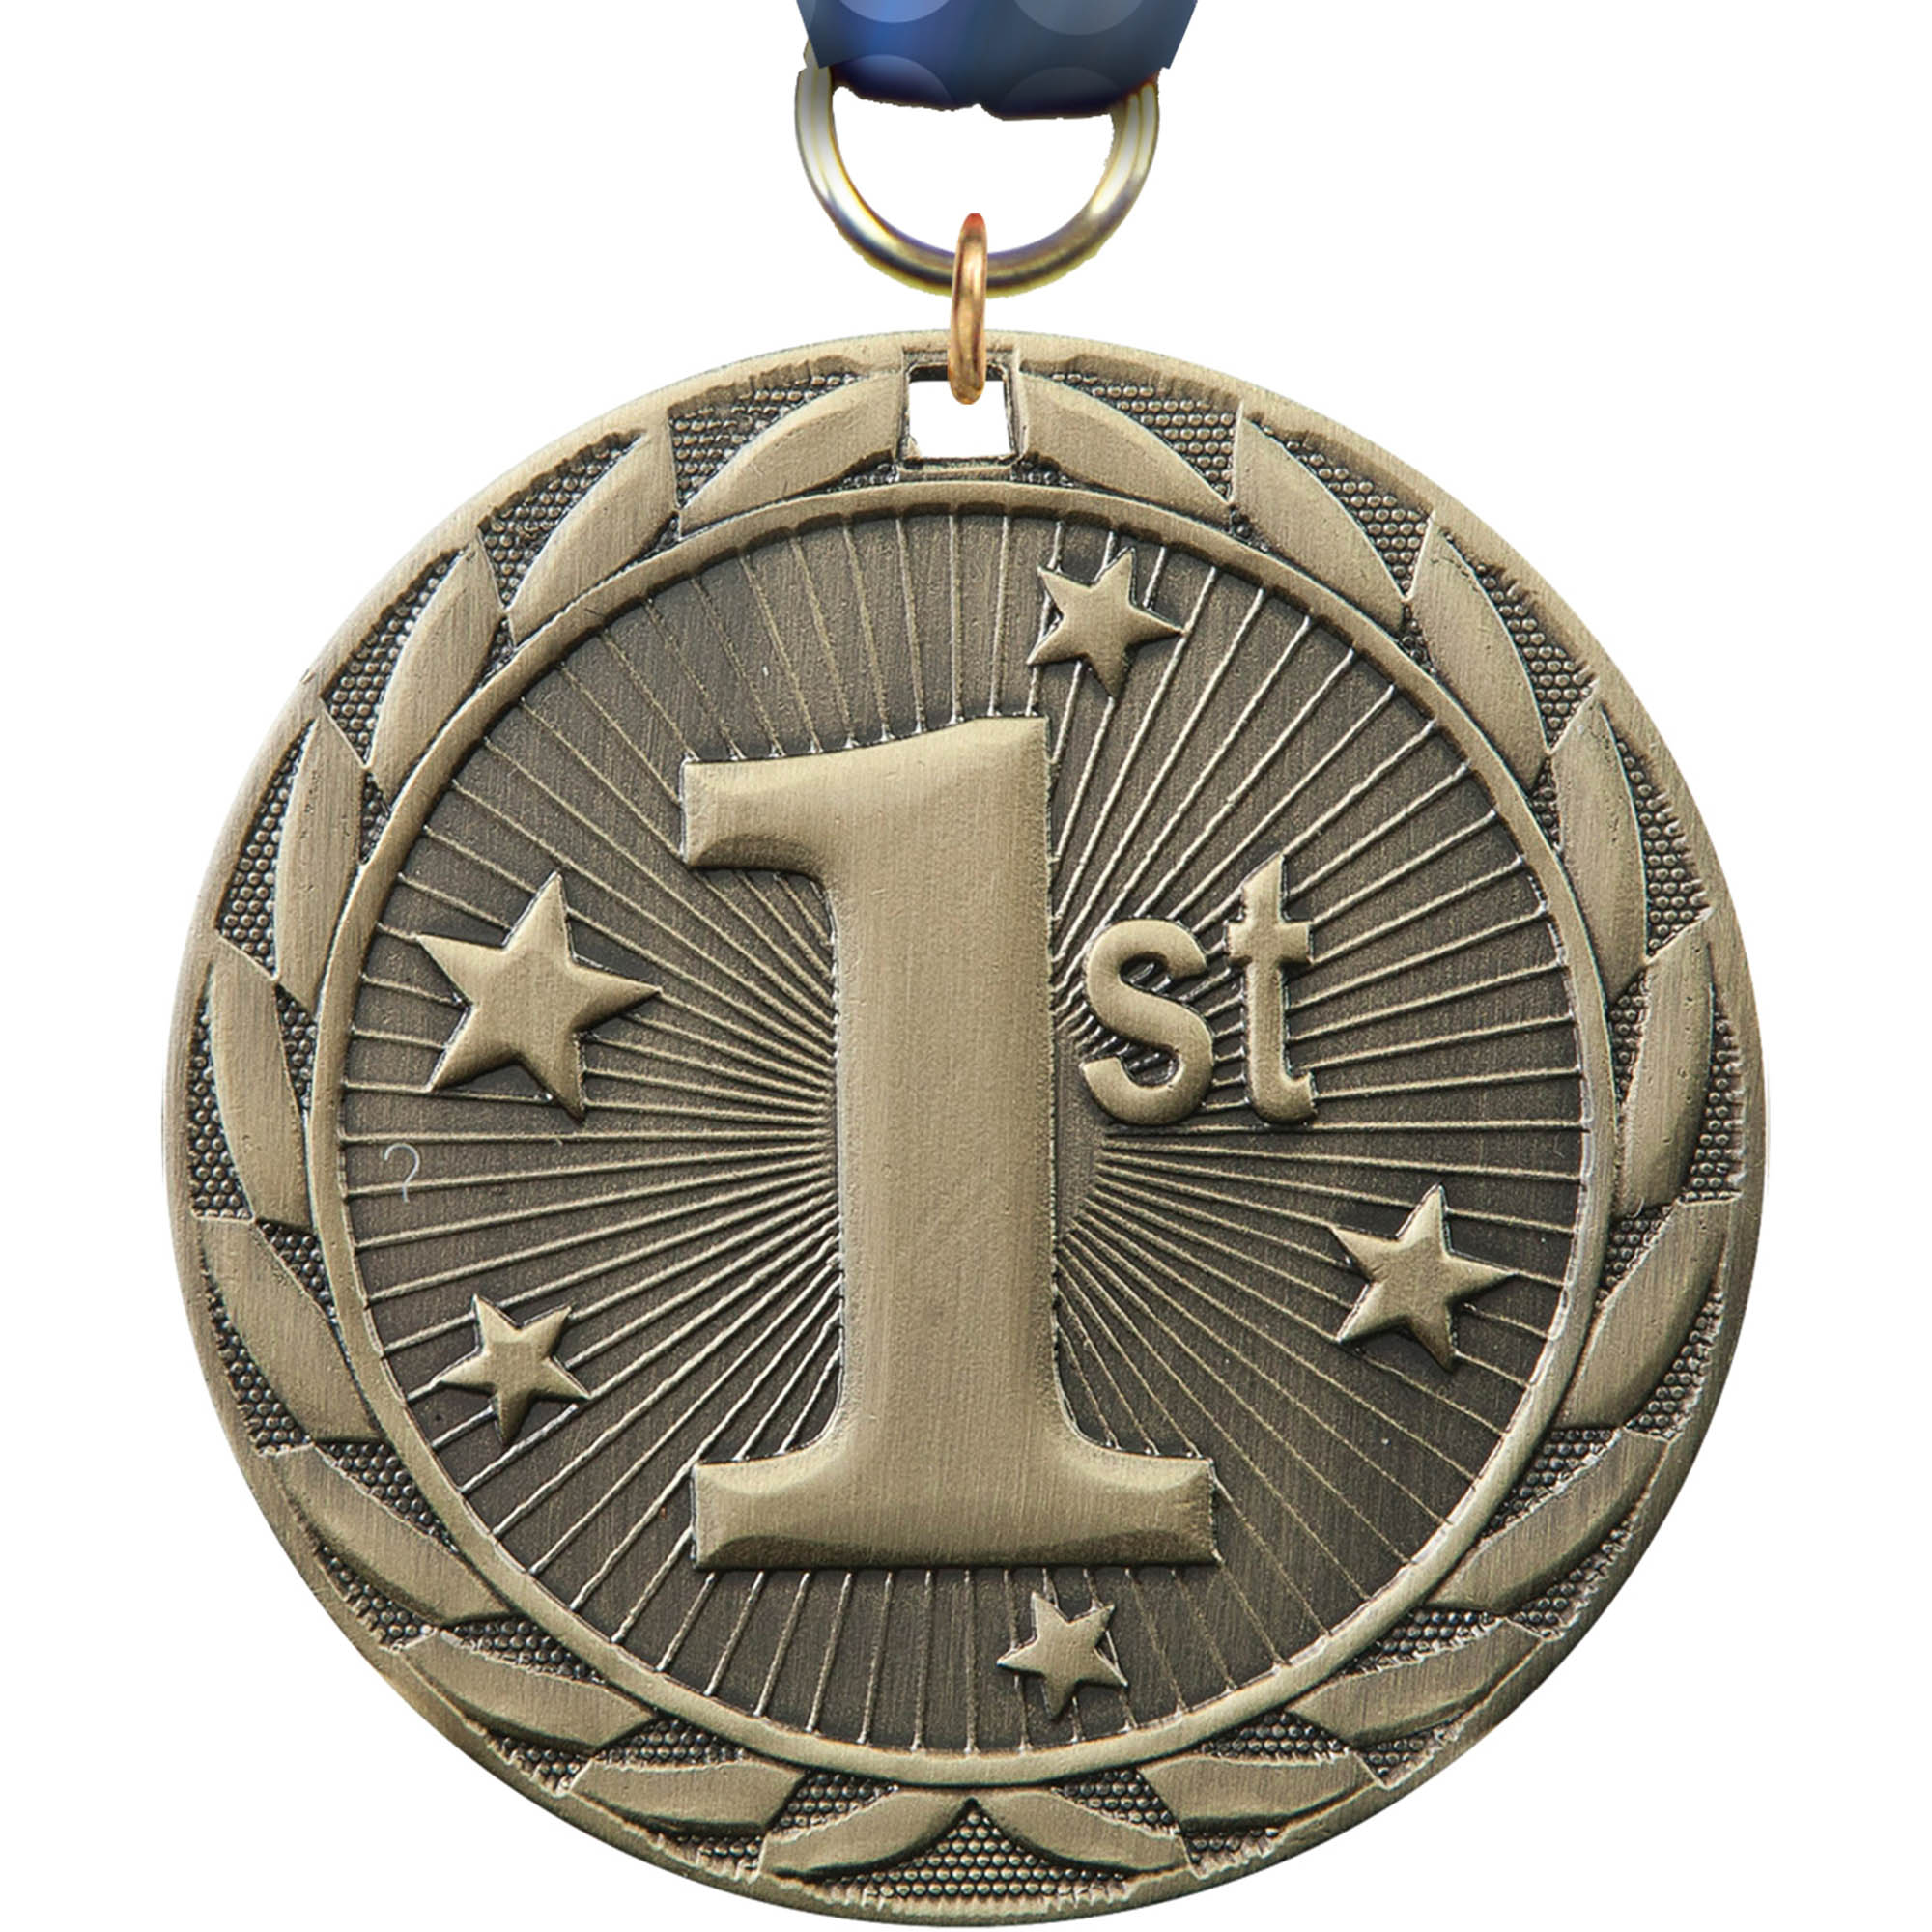 1st Place FE Iron Medal